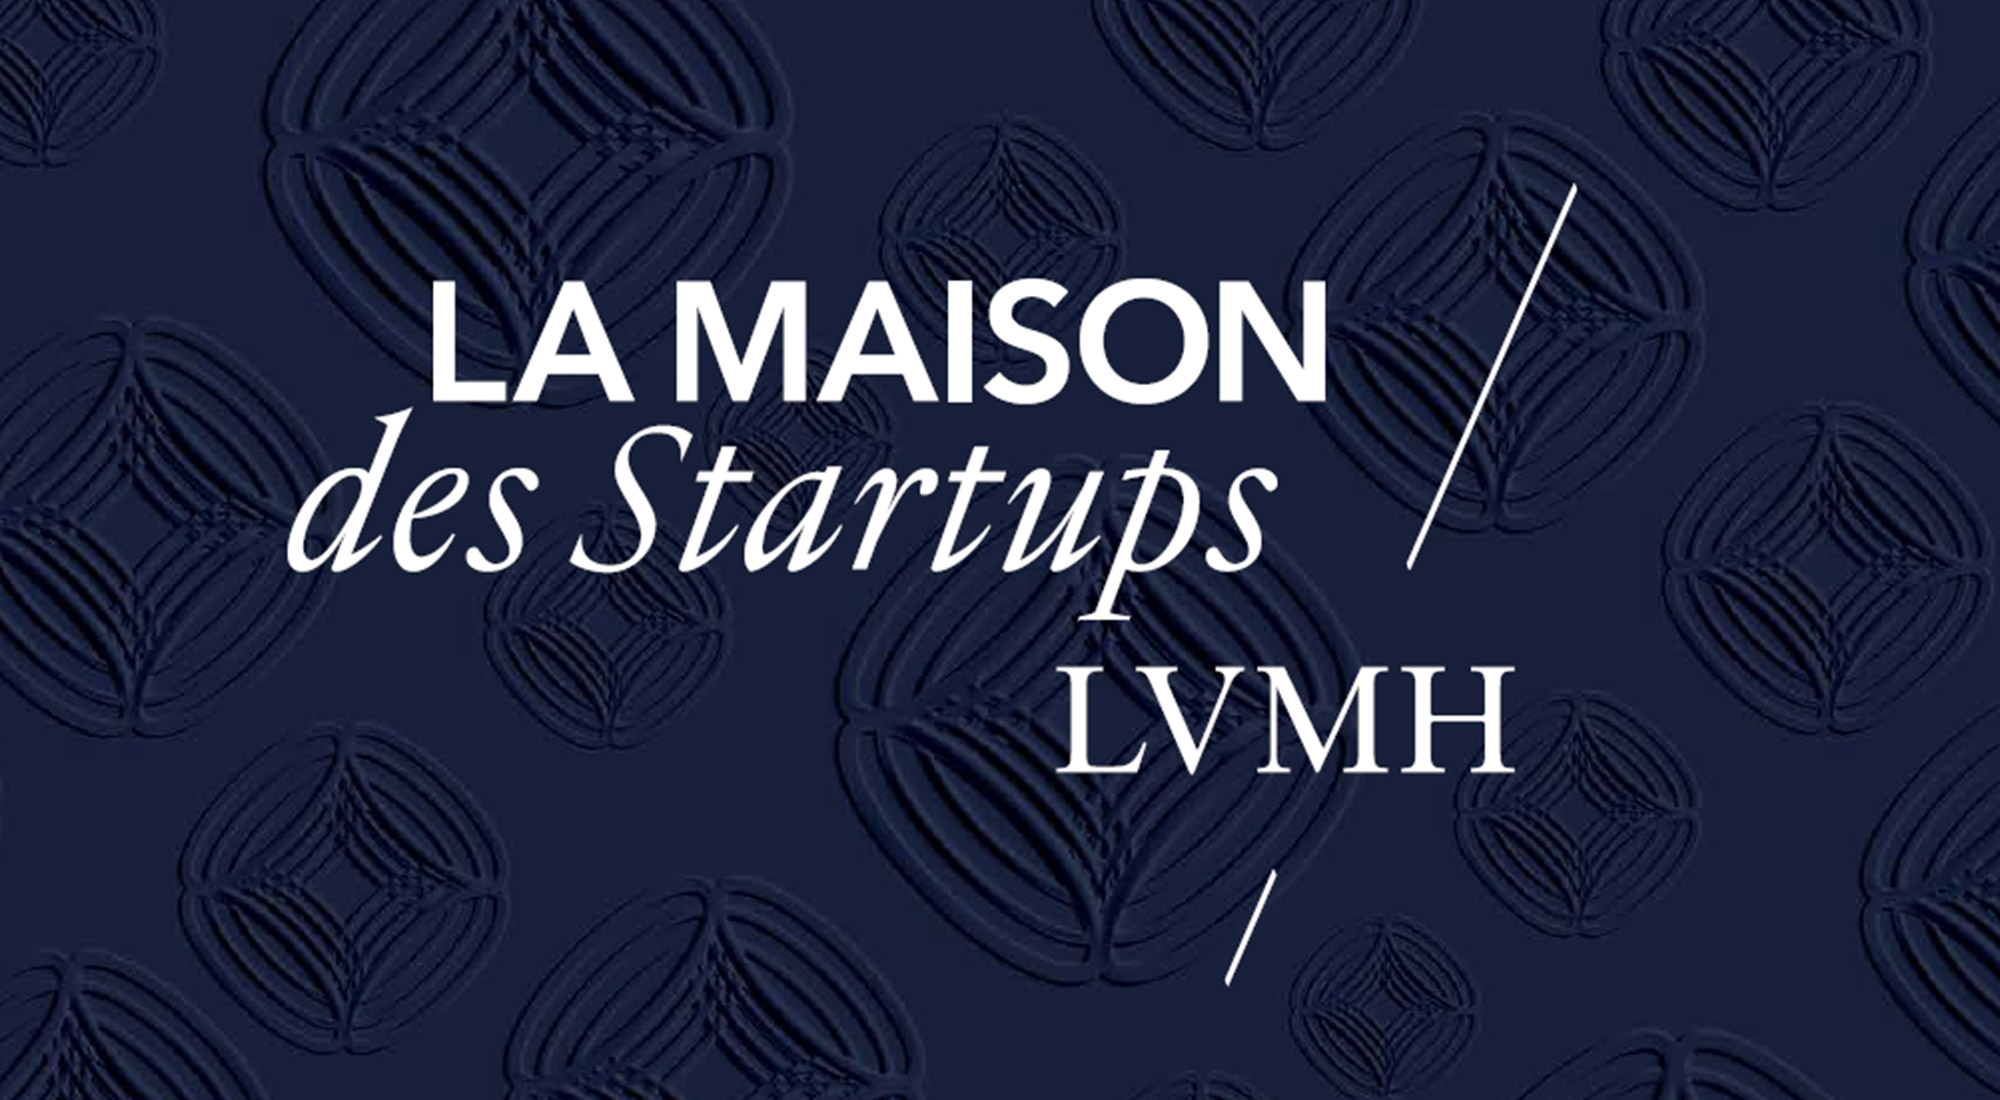 Reinventing luxury at Station F: Discover Season 7 of La Maison